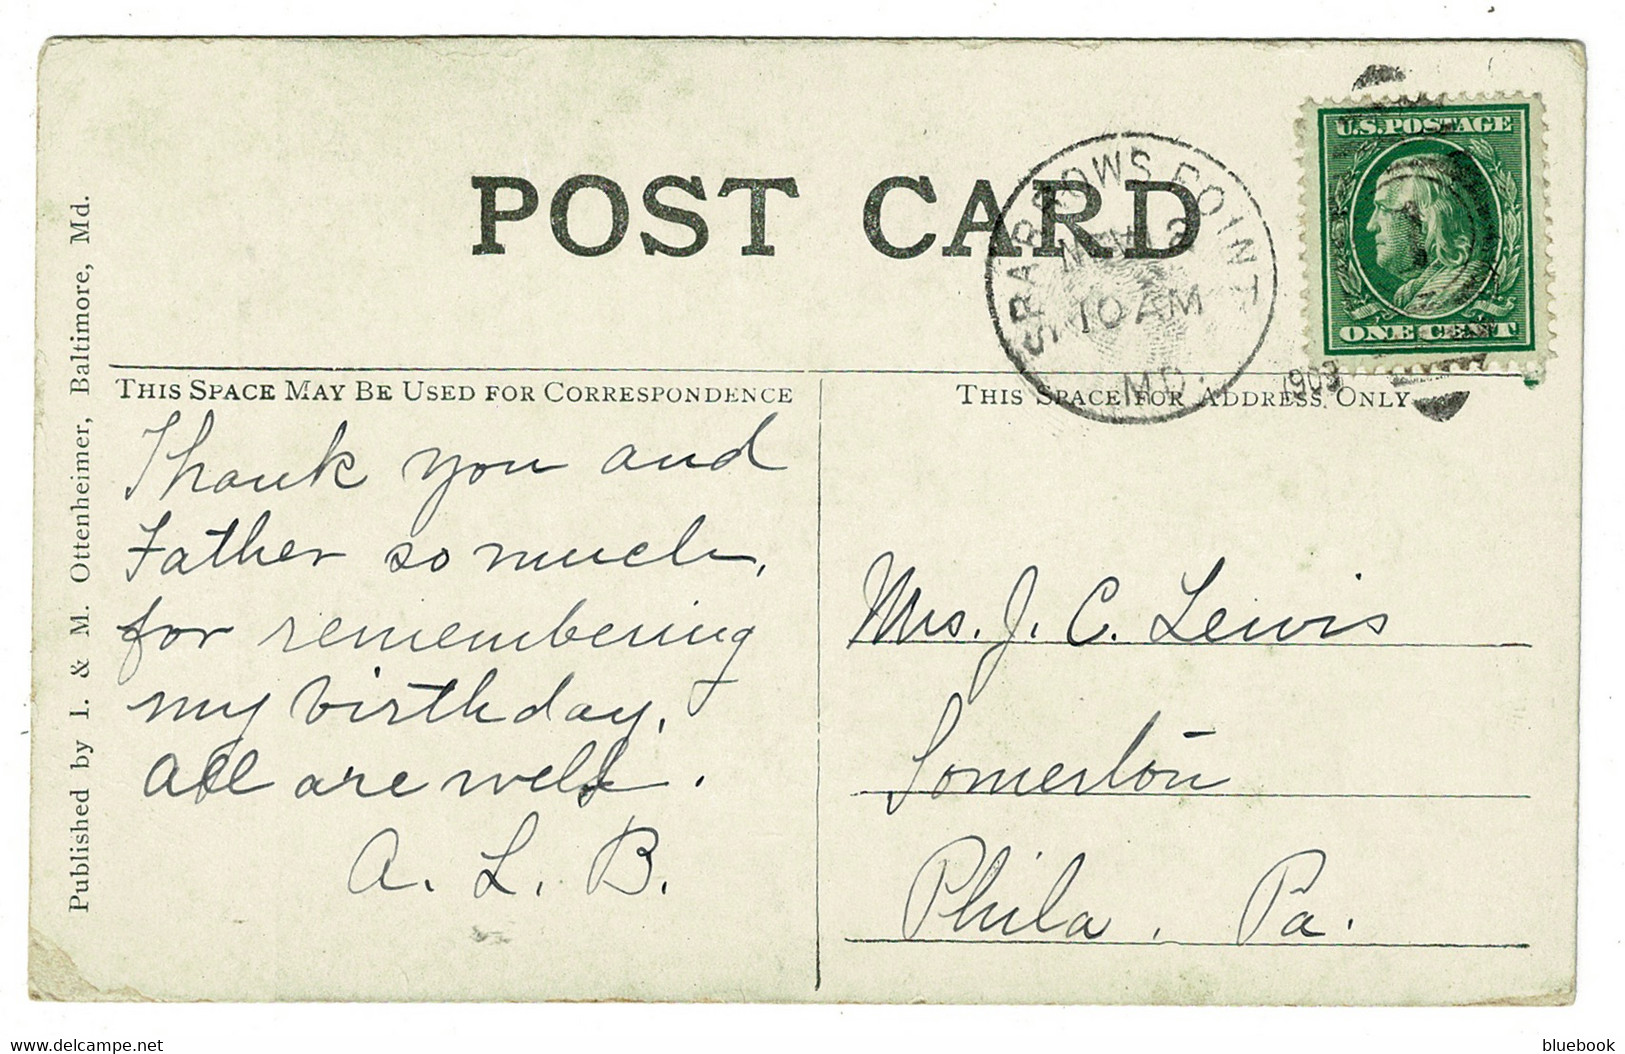 Ref 1481 - Early USA Postcard - American Building Baltimore - Sparrows Point Maryland Postmark - Baltimore